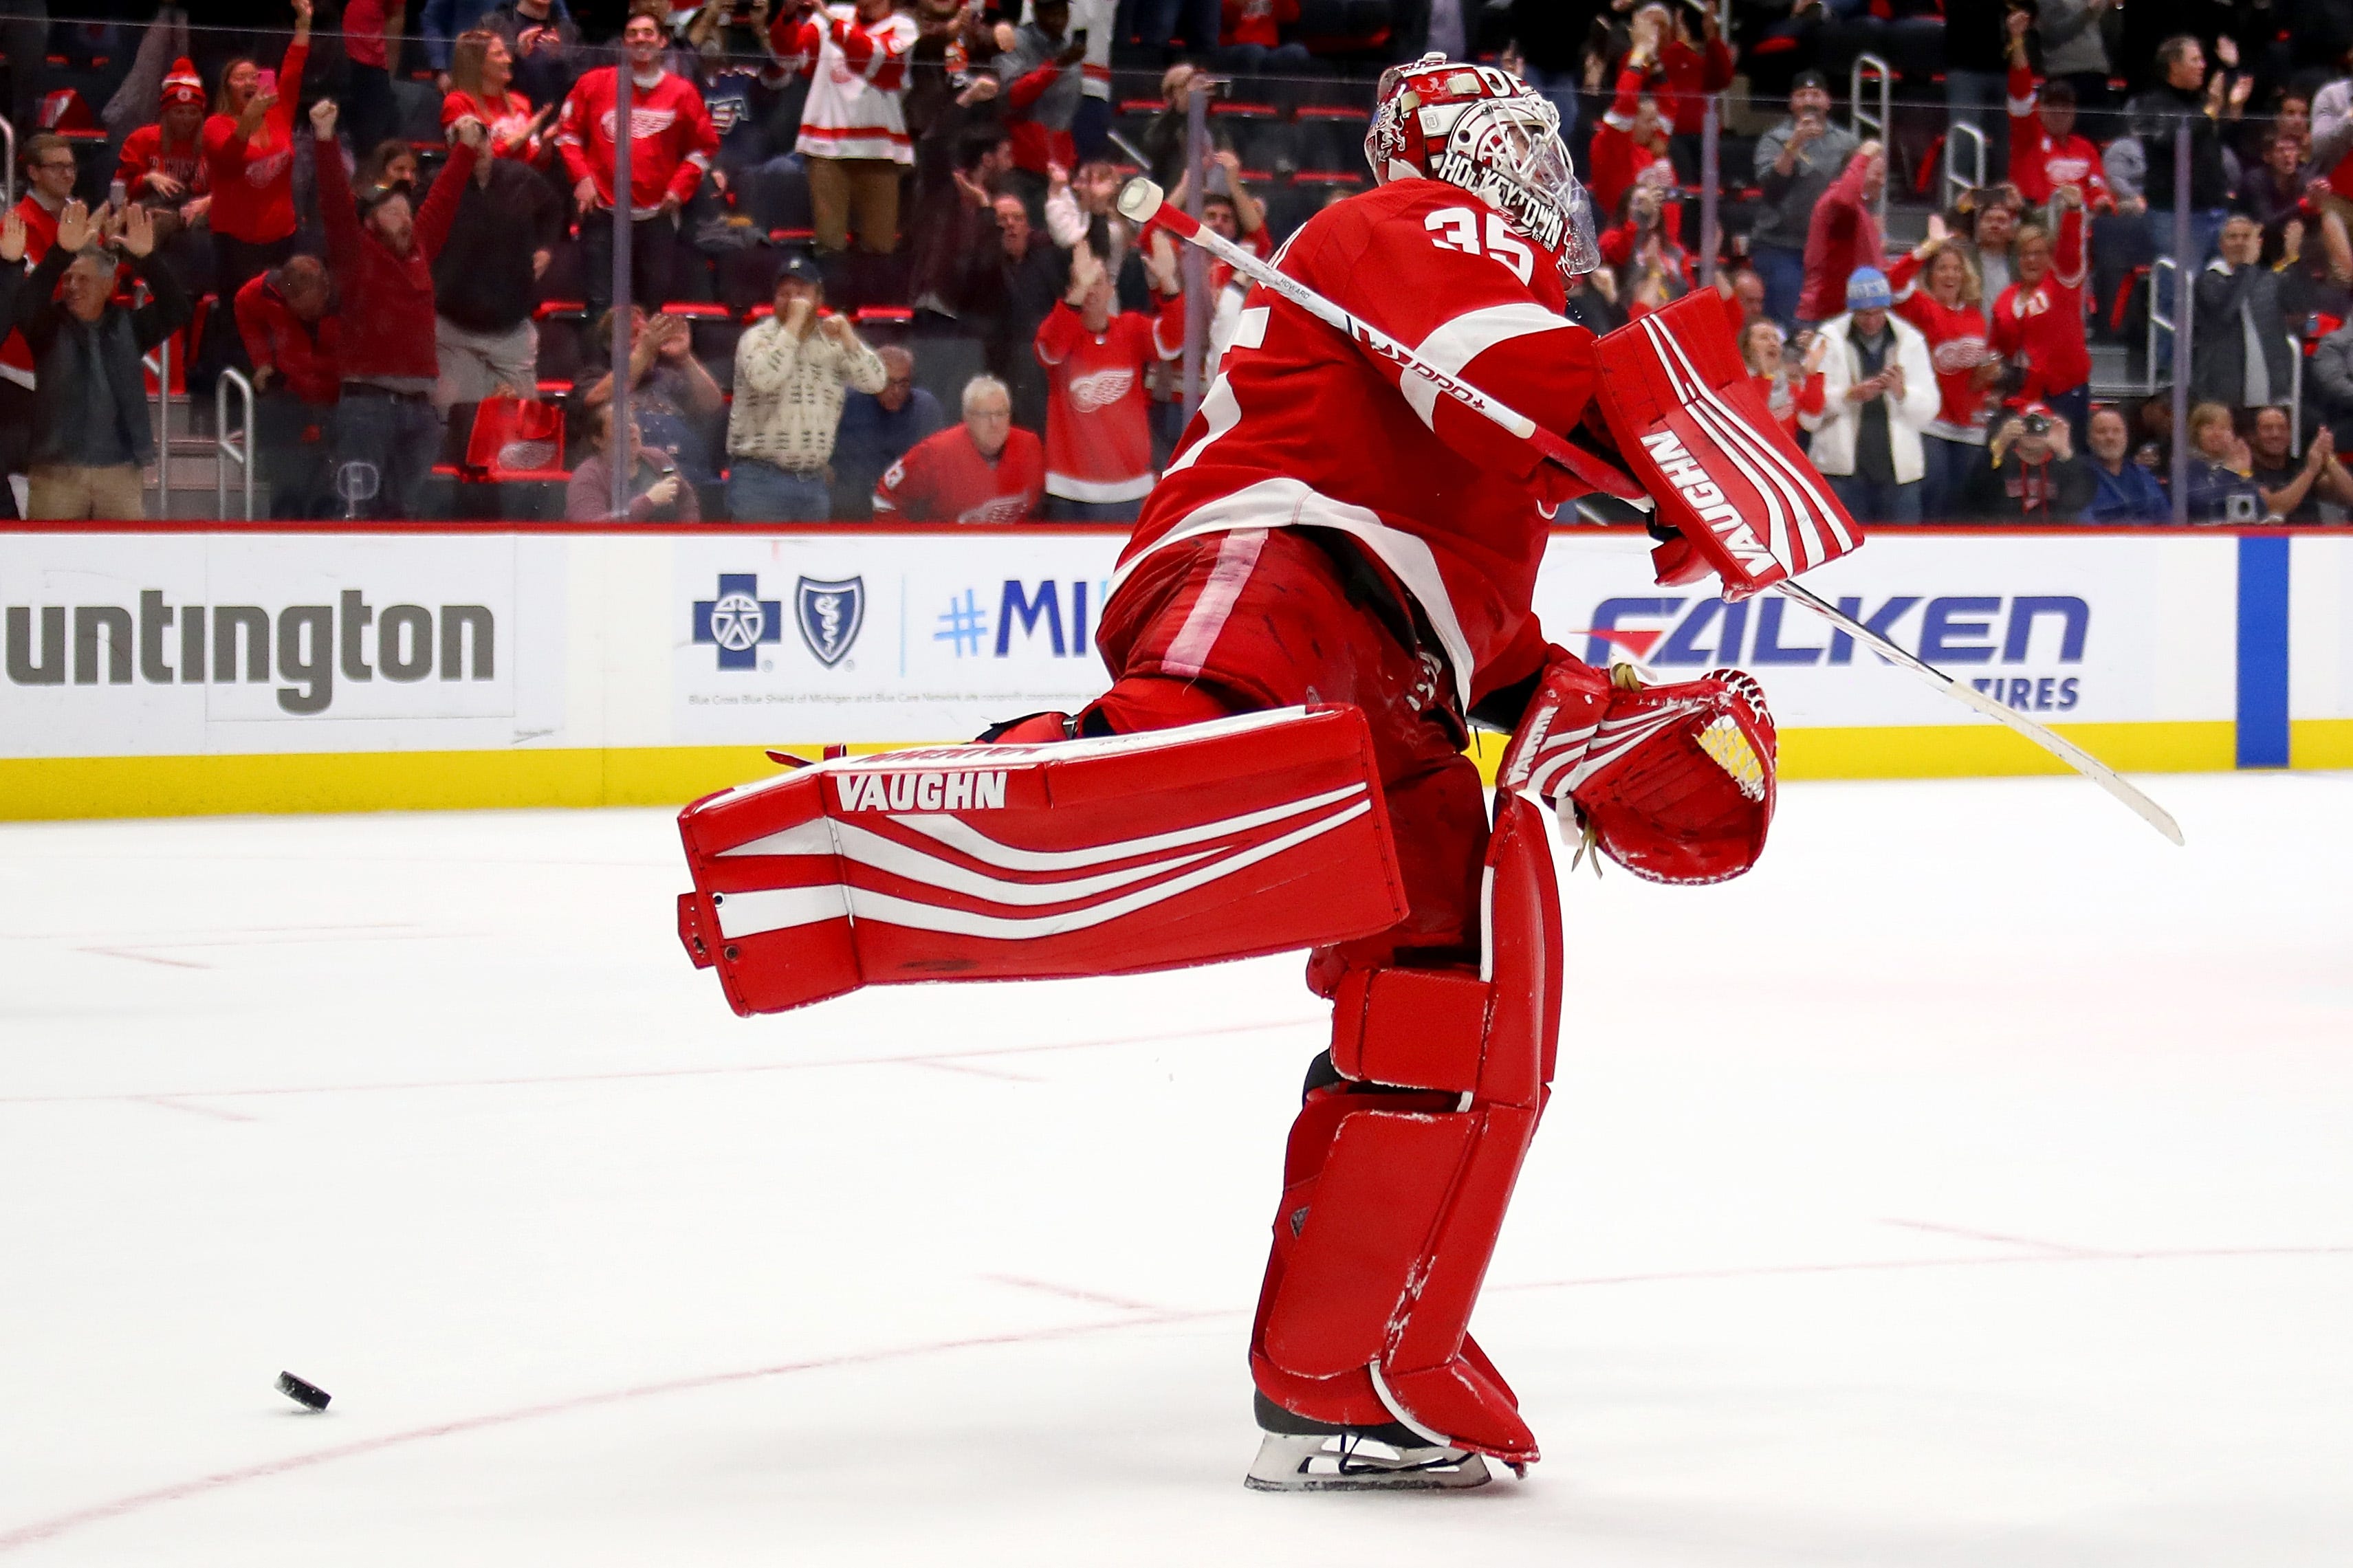 Jimmy Howard of the Detroit Red Wings celebrates a shootout save to beat the Vancouver Canucks.